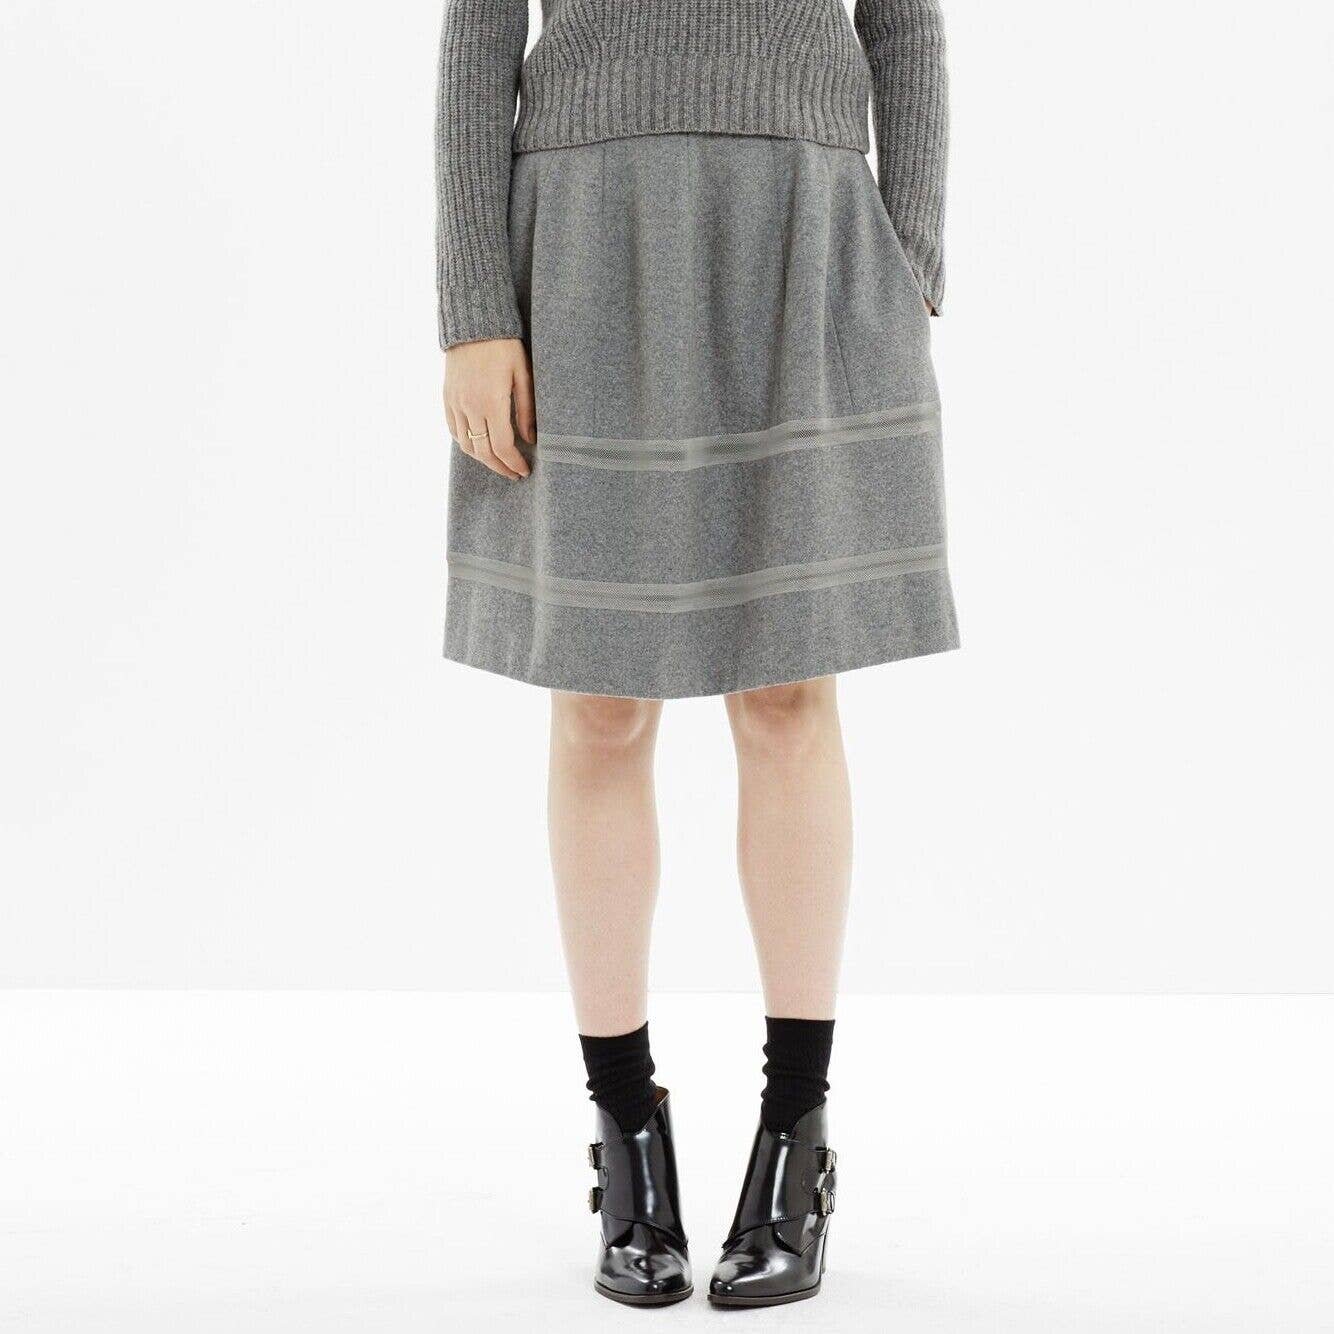 Special offer  Madewell Turnout skirt with mesh Detail Grey Size 2 MXXToBv9C outlet online shop